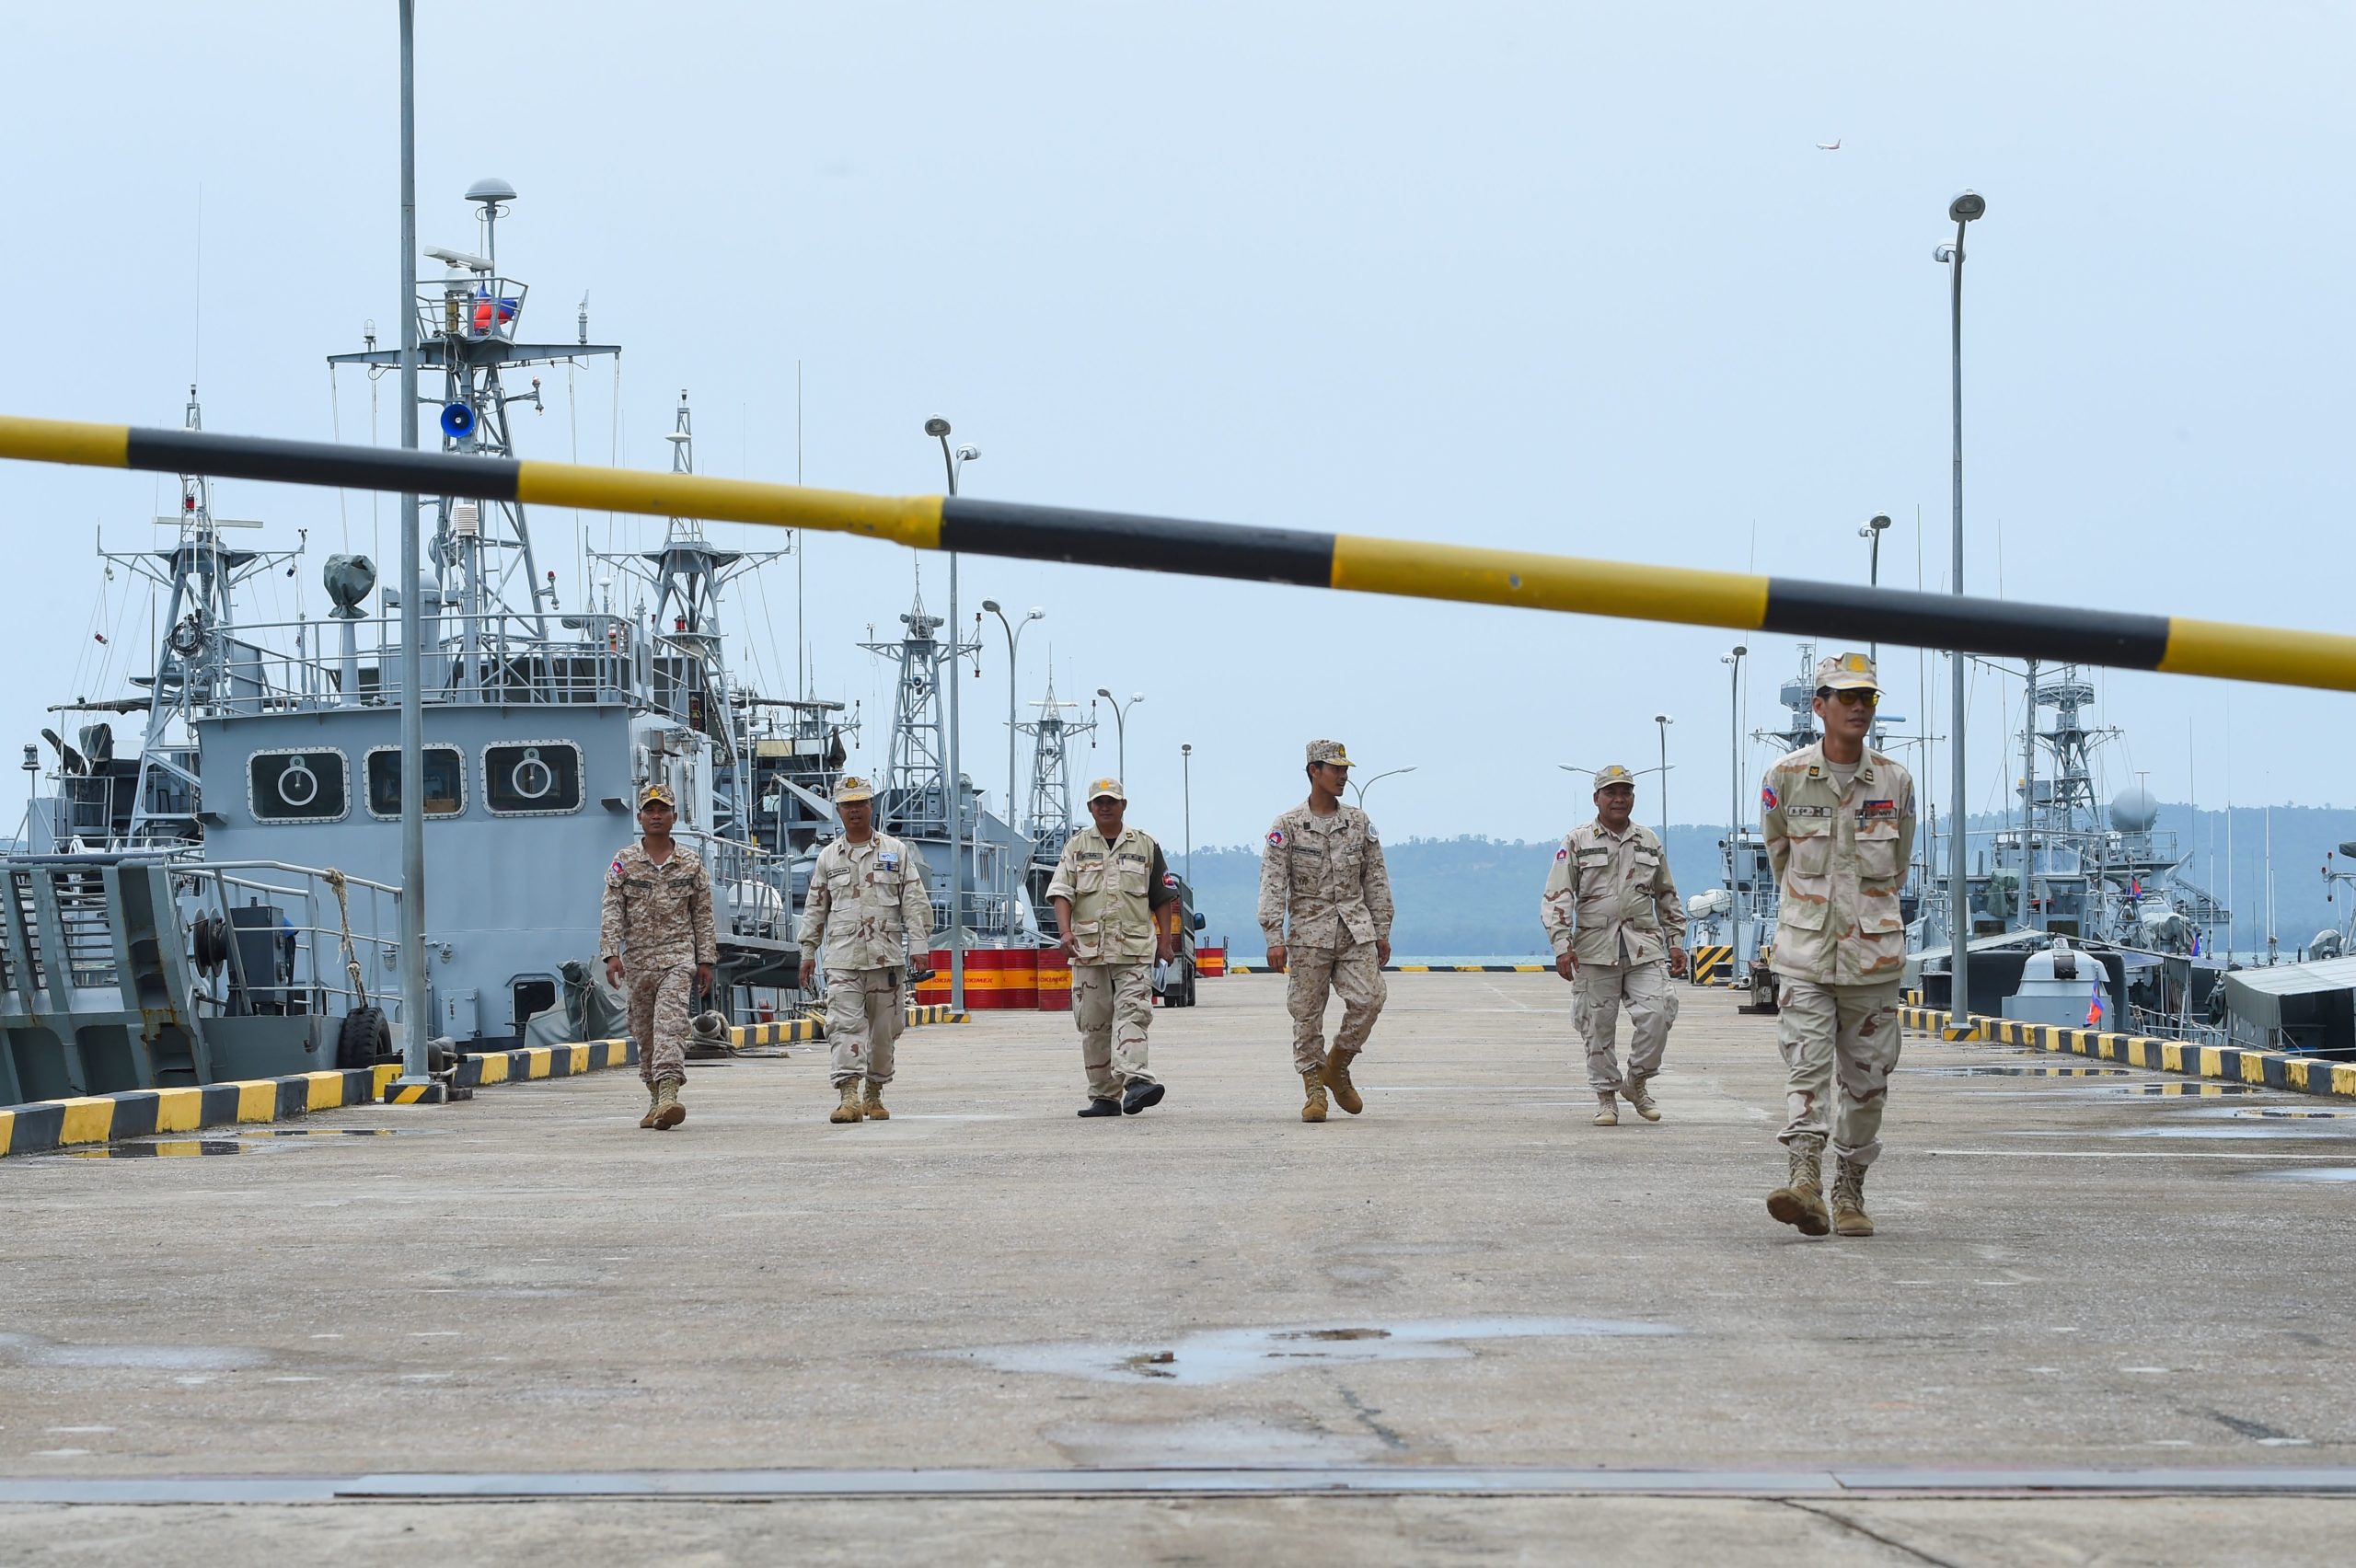 Cambodian navy personnel walk on a jetty in Ream naval base in Preah Sihanouk province during a government organized media tour on July 26, 2019. - Cambodia on July 25 rubbished reports of a deal allowing China to use a naval base as "ill-intended" and aimed at inciting unrest in a country whose public is increasingly uneasy about Beijing's growing influence. 